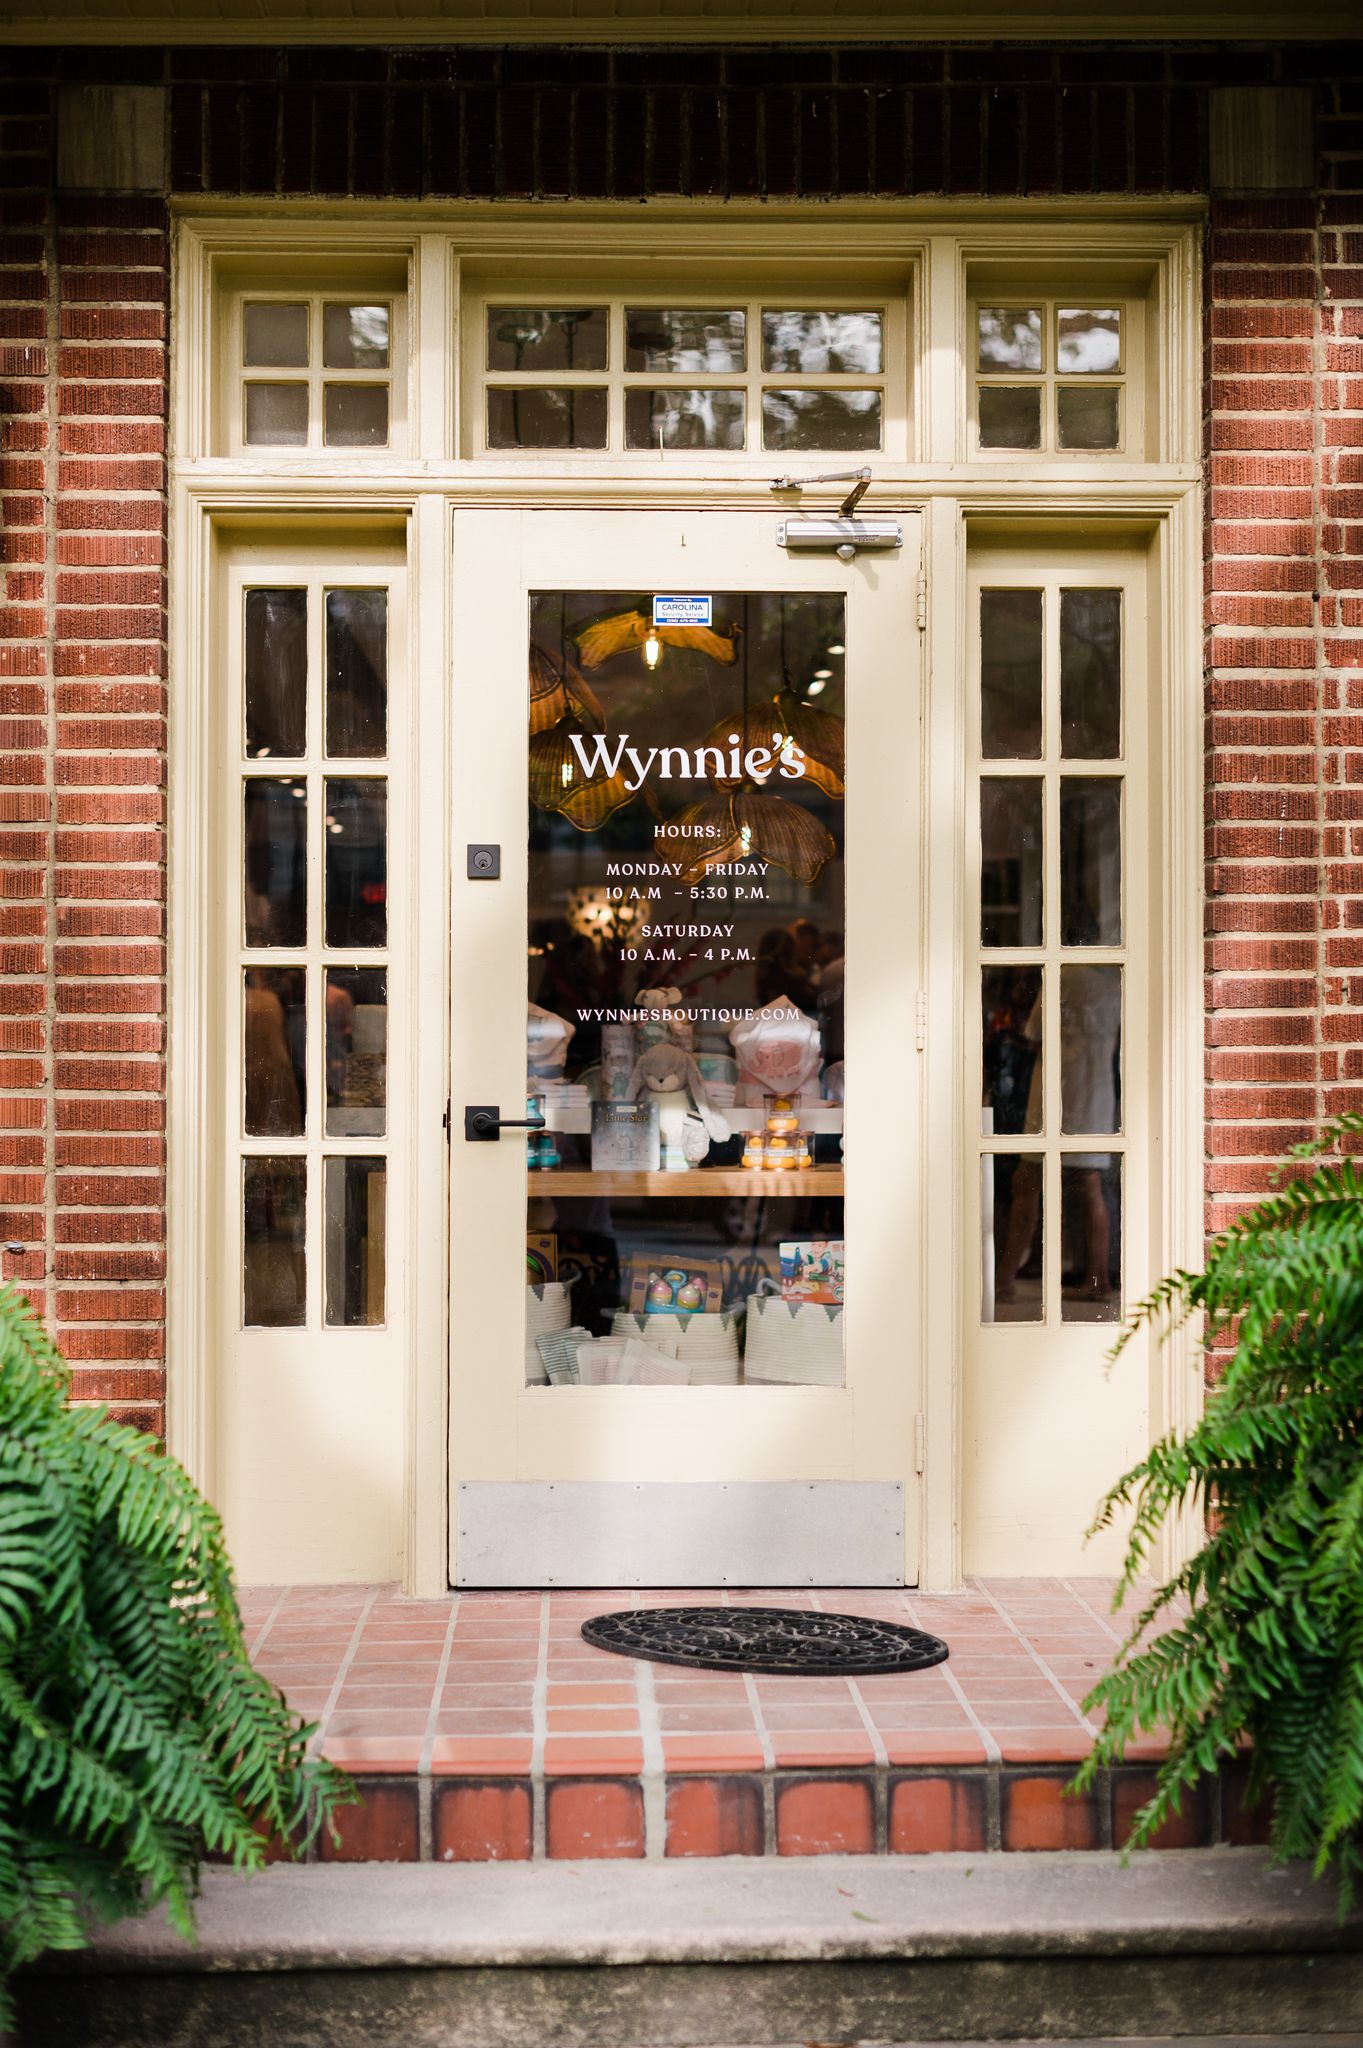 Storefront of a brick building with glass door that says "Wynnie's."